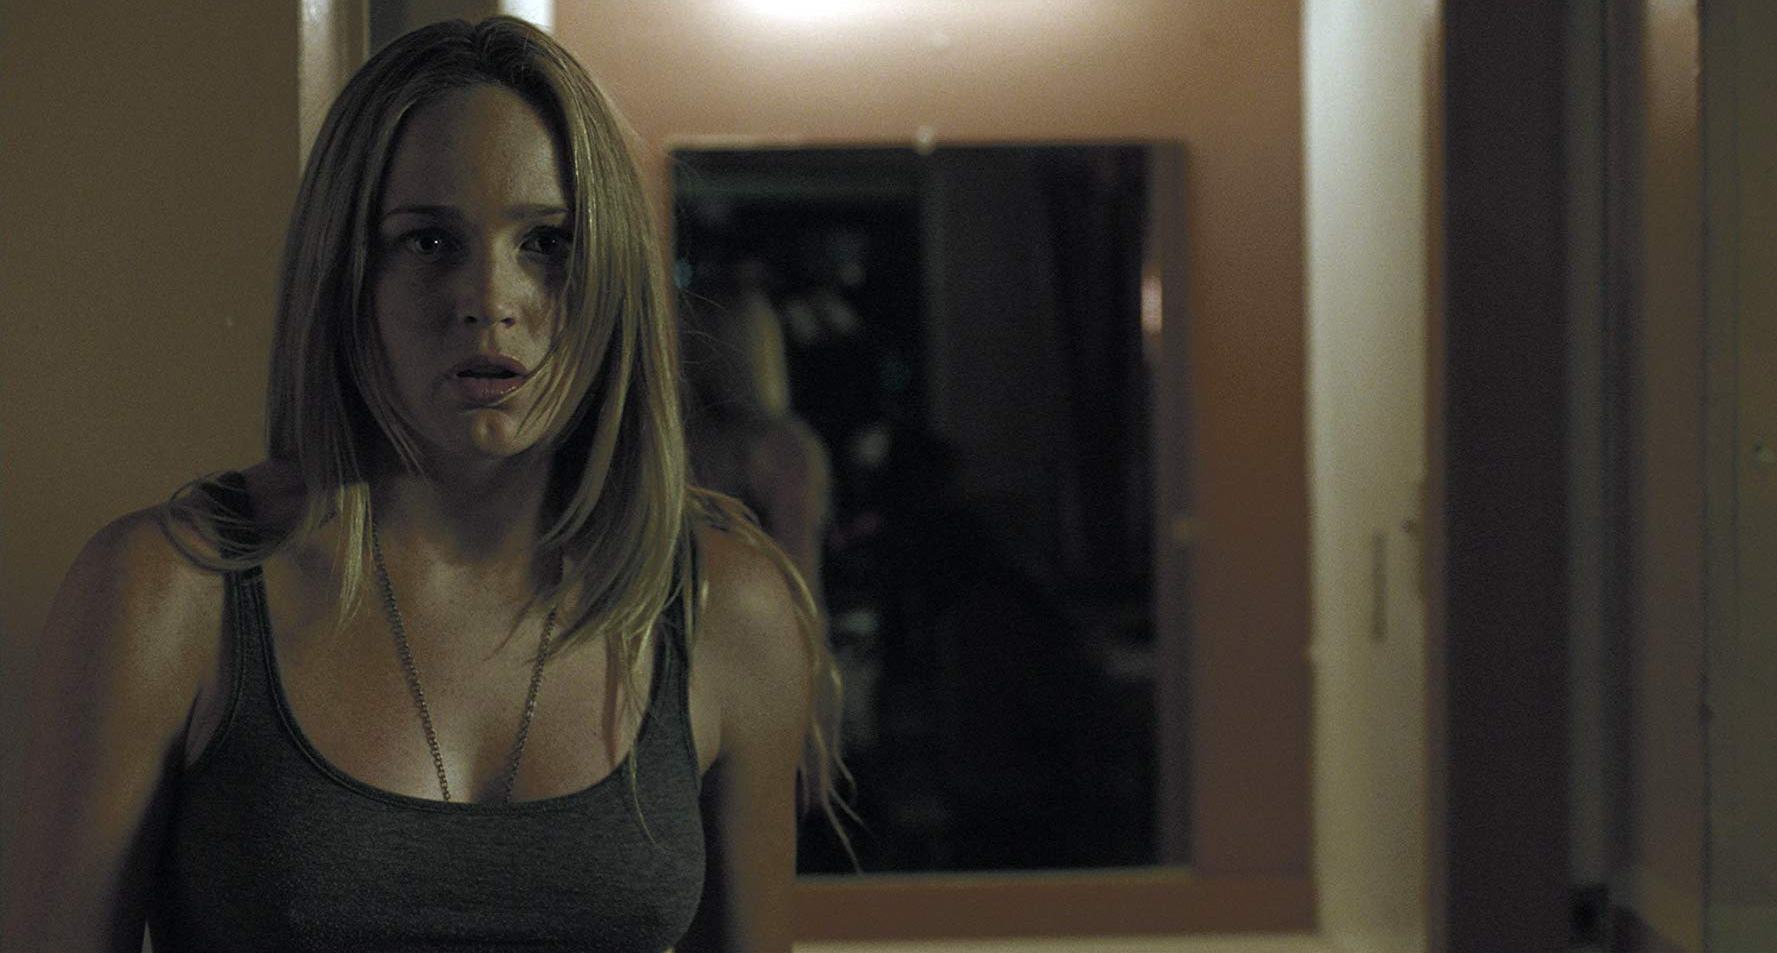 Caity Lotz investigates mysterious happenings in The Pact (2012)